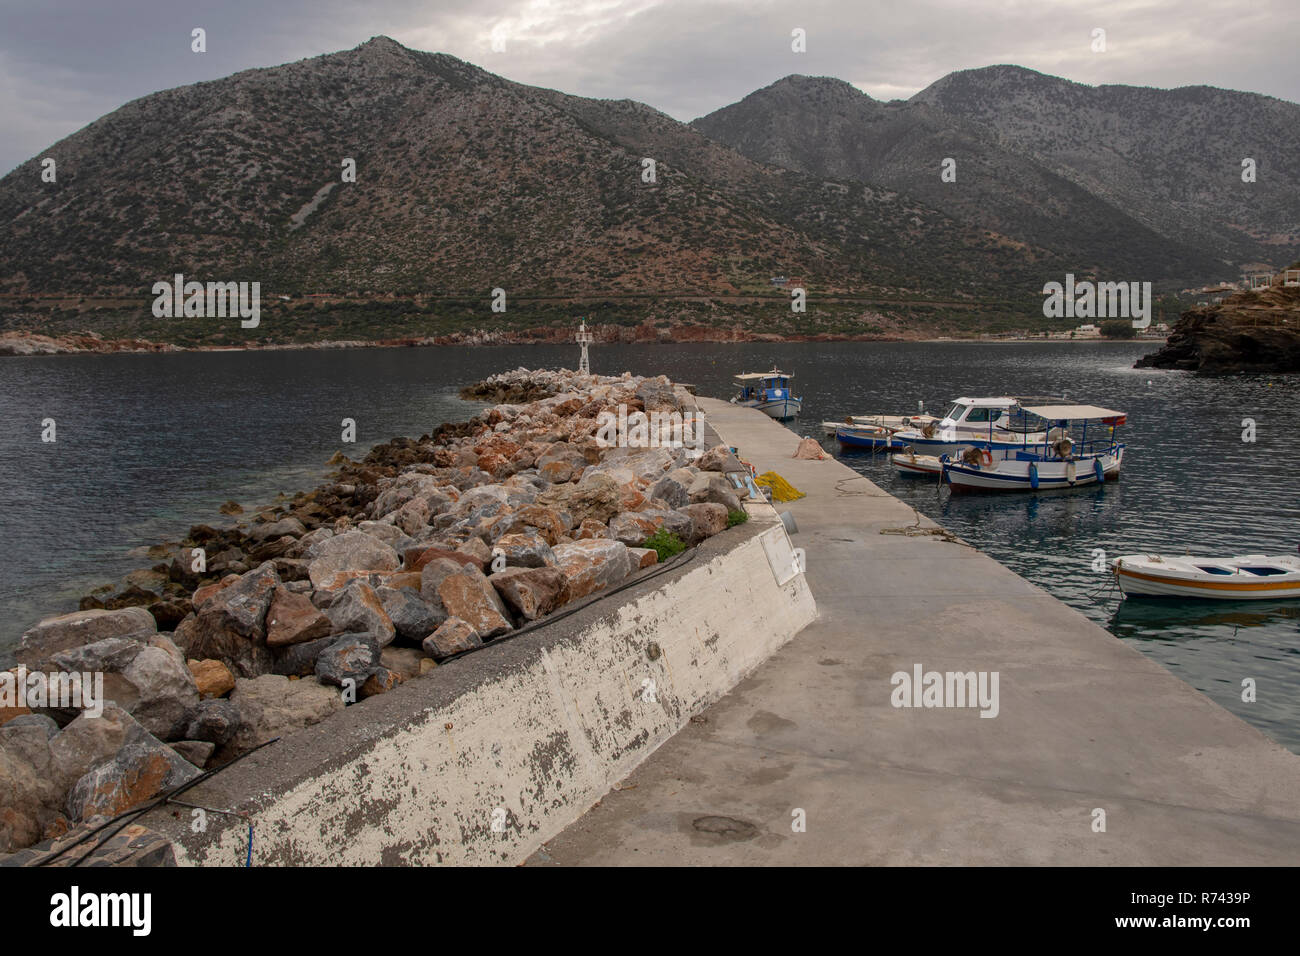 Pier in forefront with some local fishing boats and mountains in background, picture from Bali area in Rethymno on Crete Island. Stock Photo